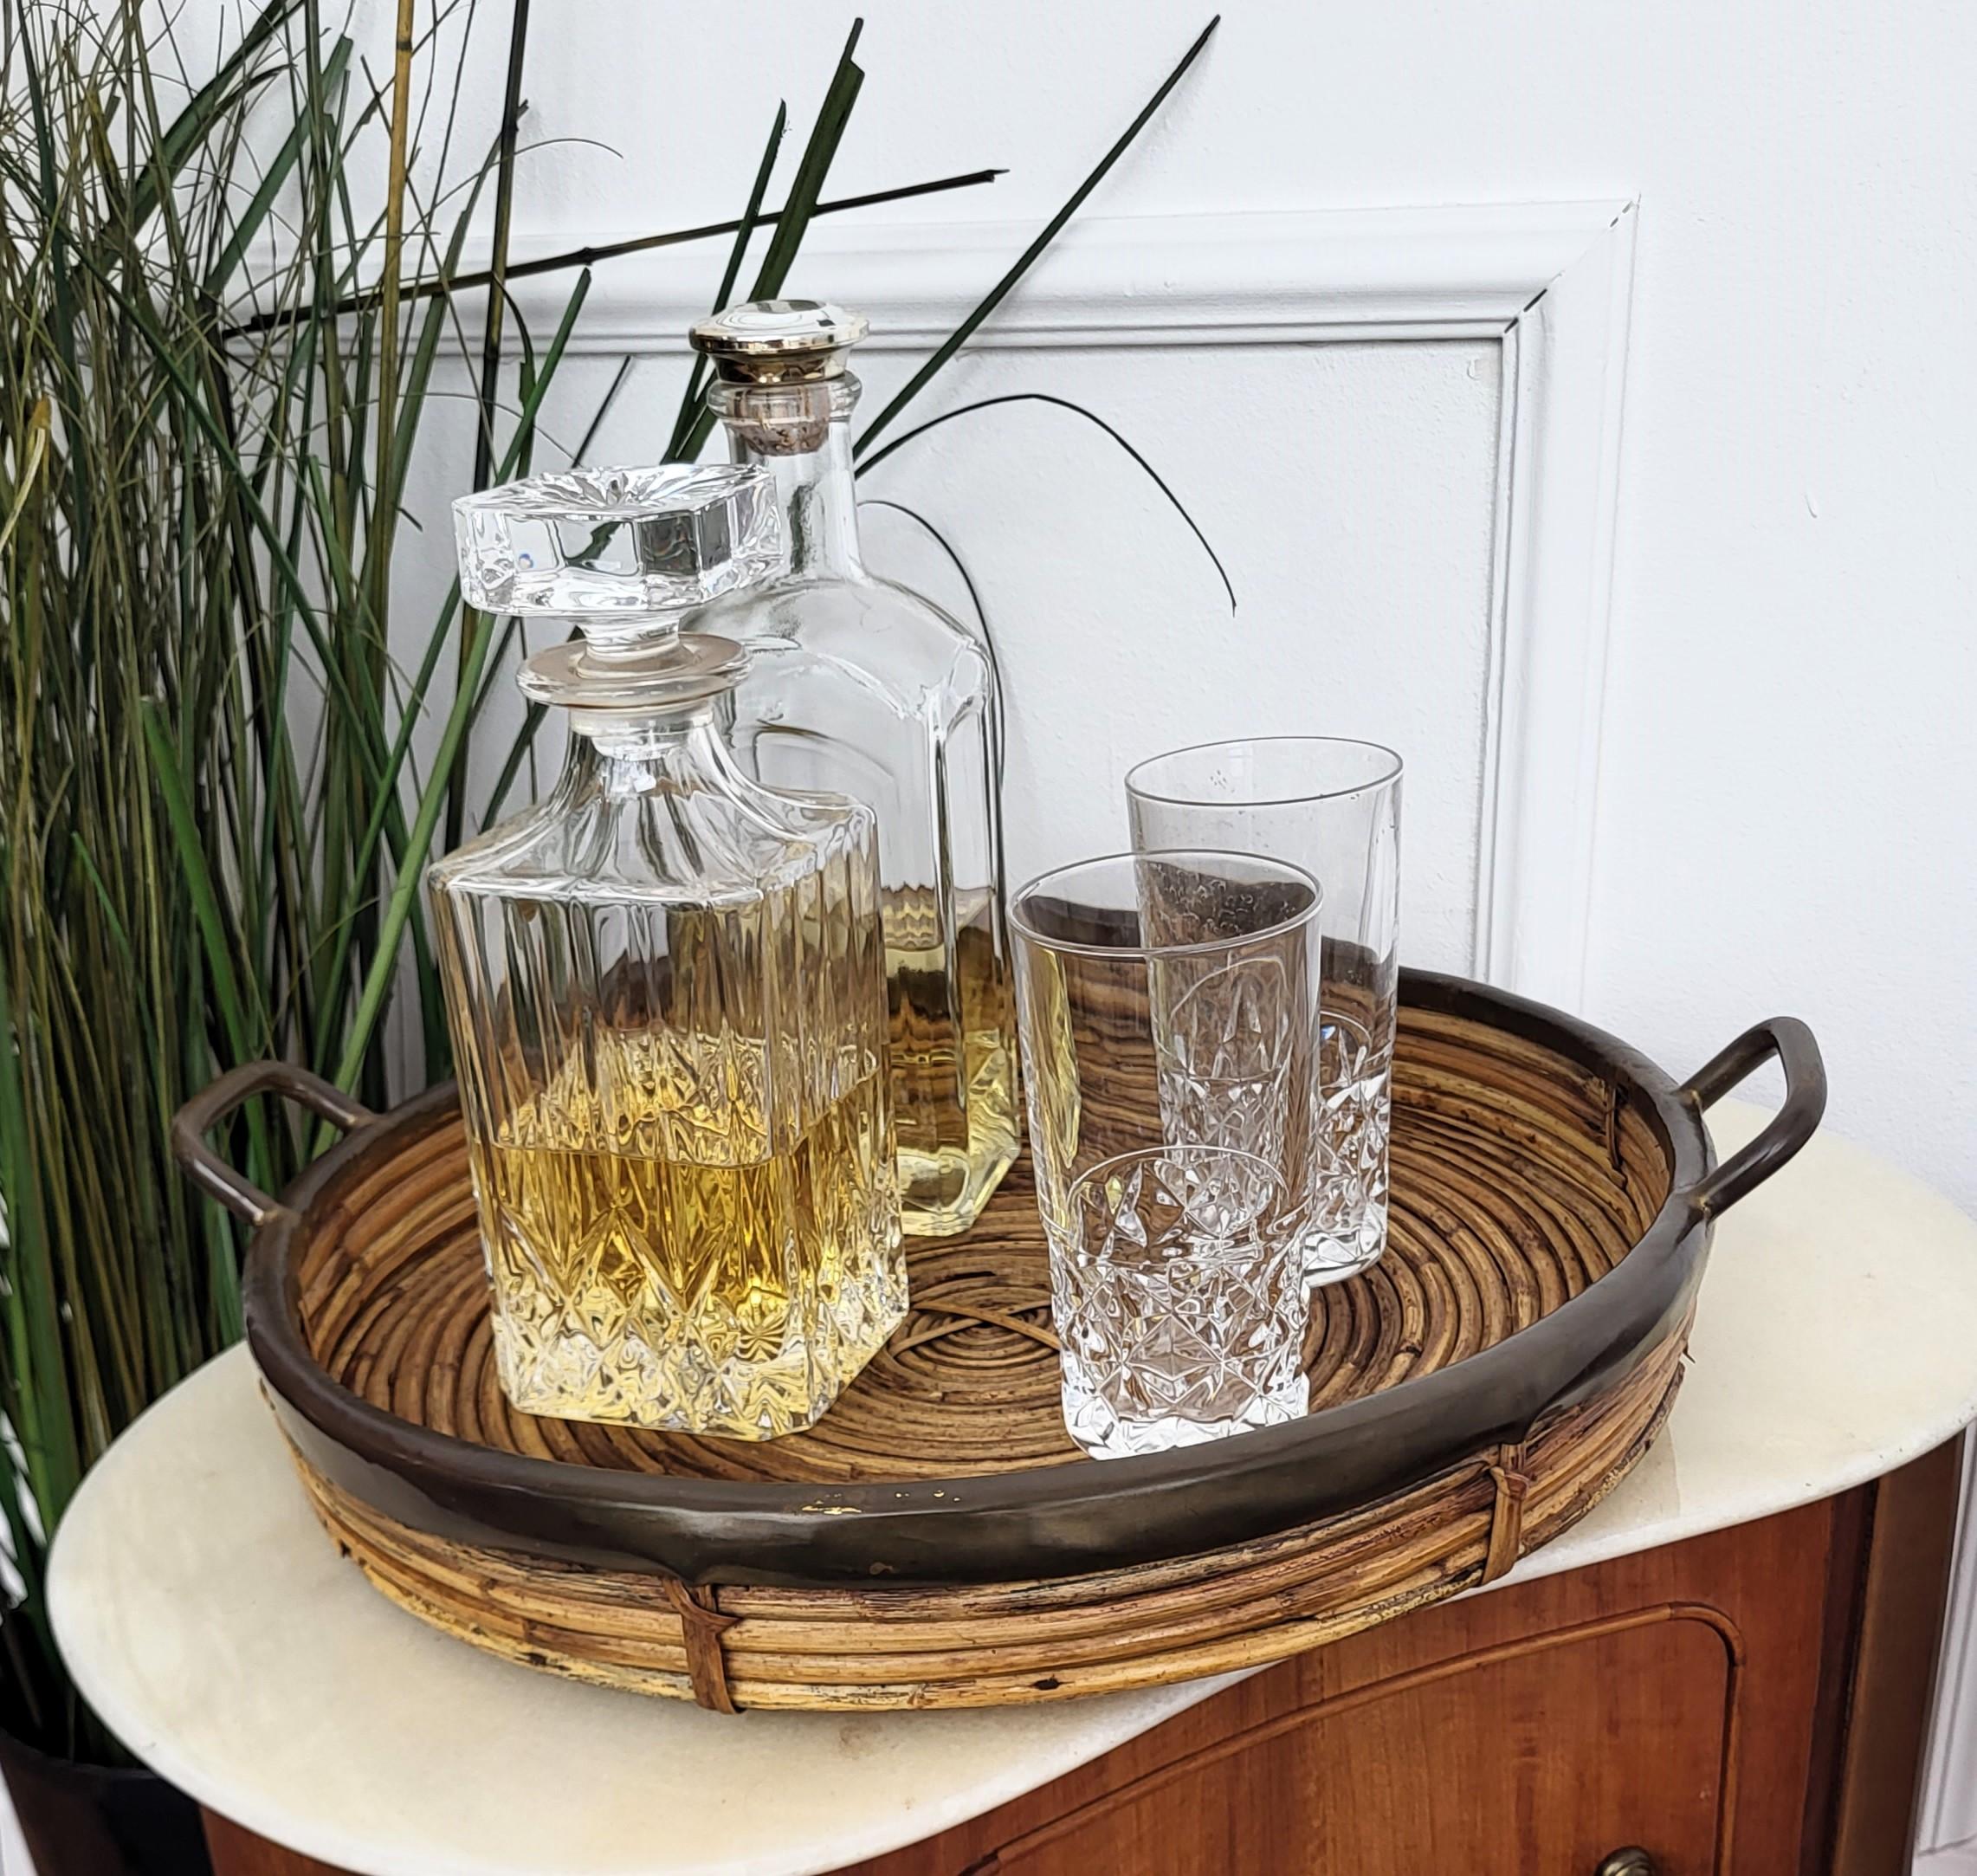 Beautiful 1960s Italian Mid-Century Modern serving cocktail bar tray with polished brass rim. Made of rattan and bamboo, this charming piece is in the typical style where the organic beauty of the woven materials is timeless and classic, making